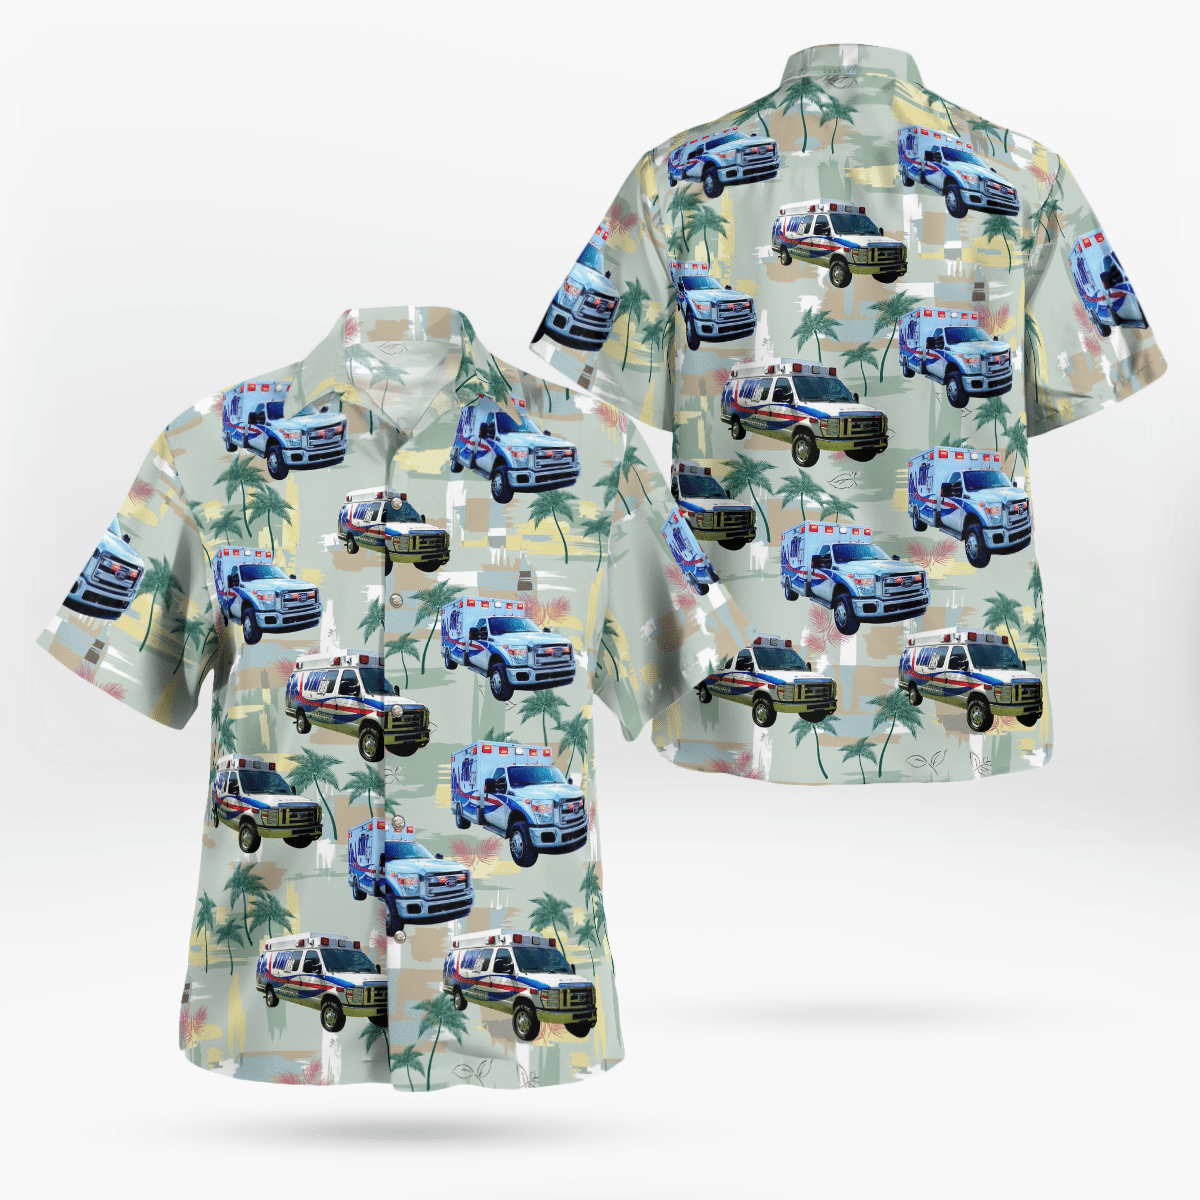 If you are in need of a new summertime look, pick up this Hawaiian shirt 64